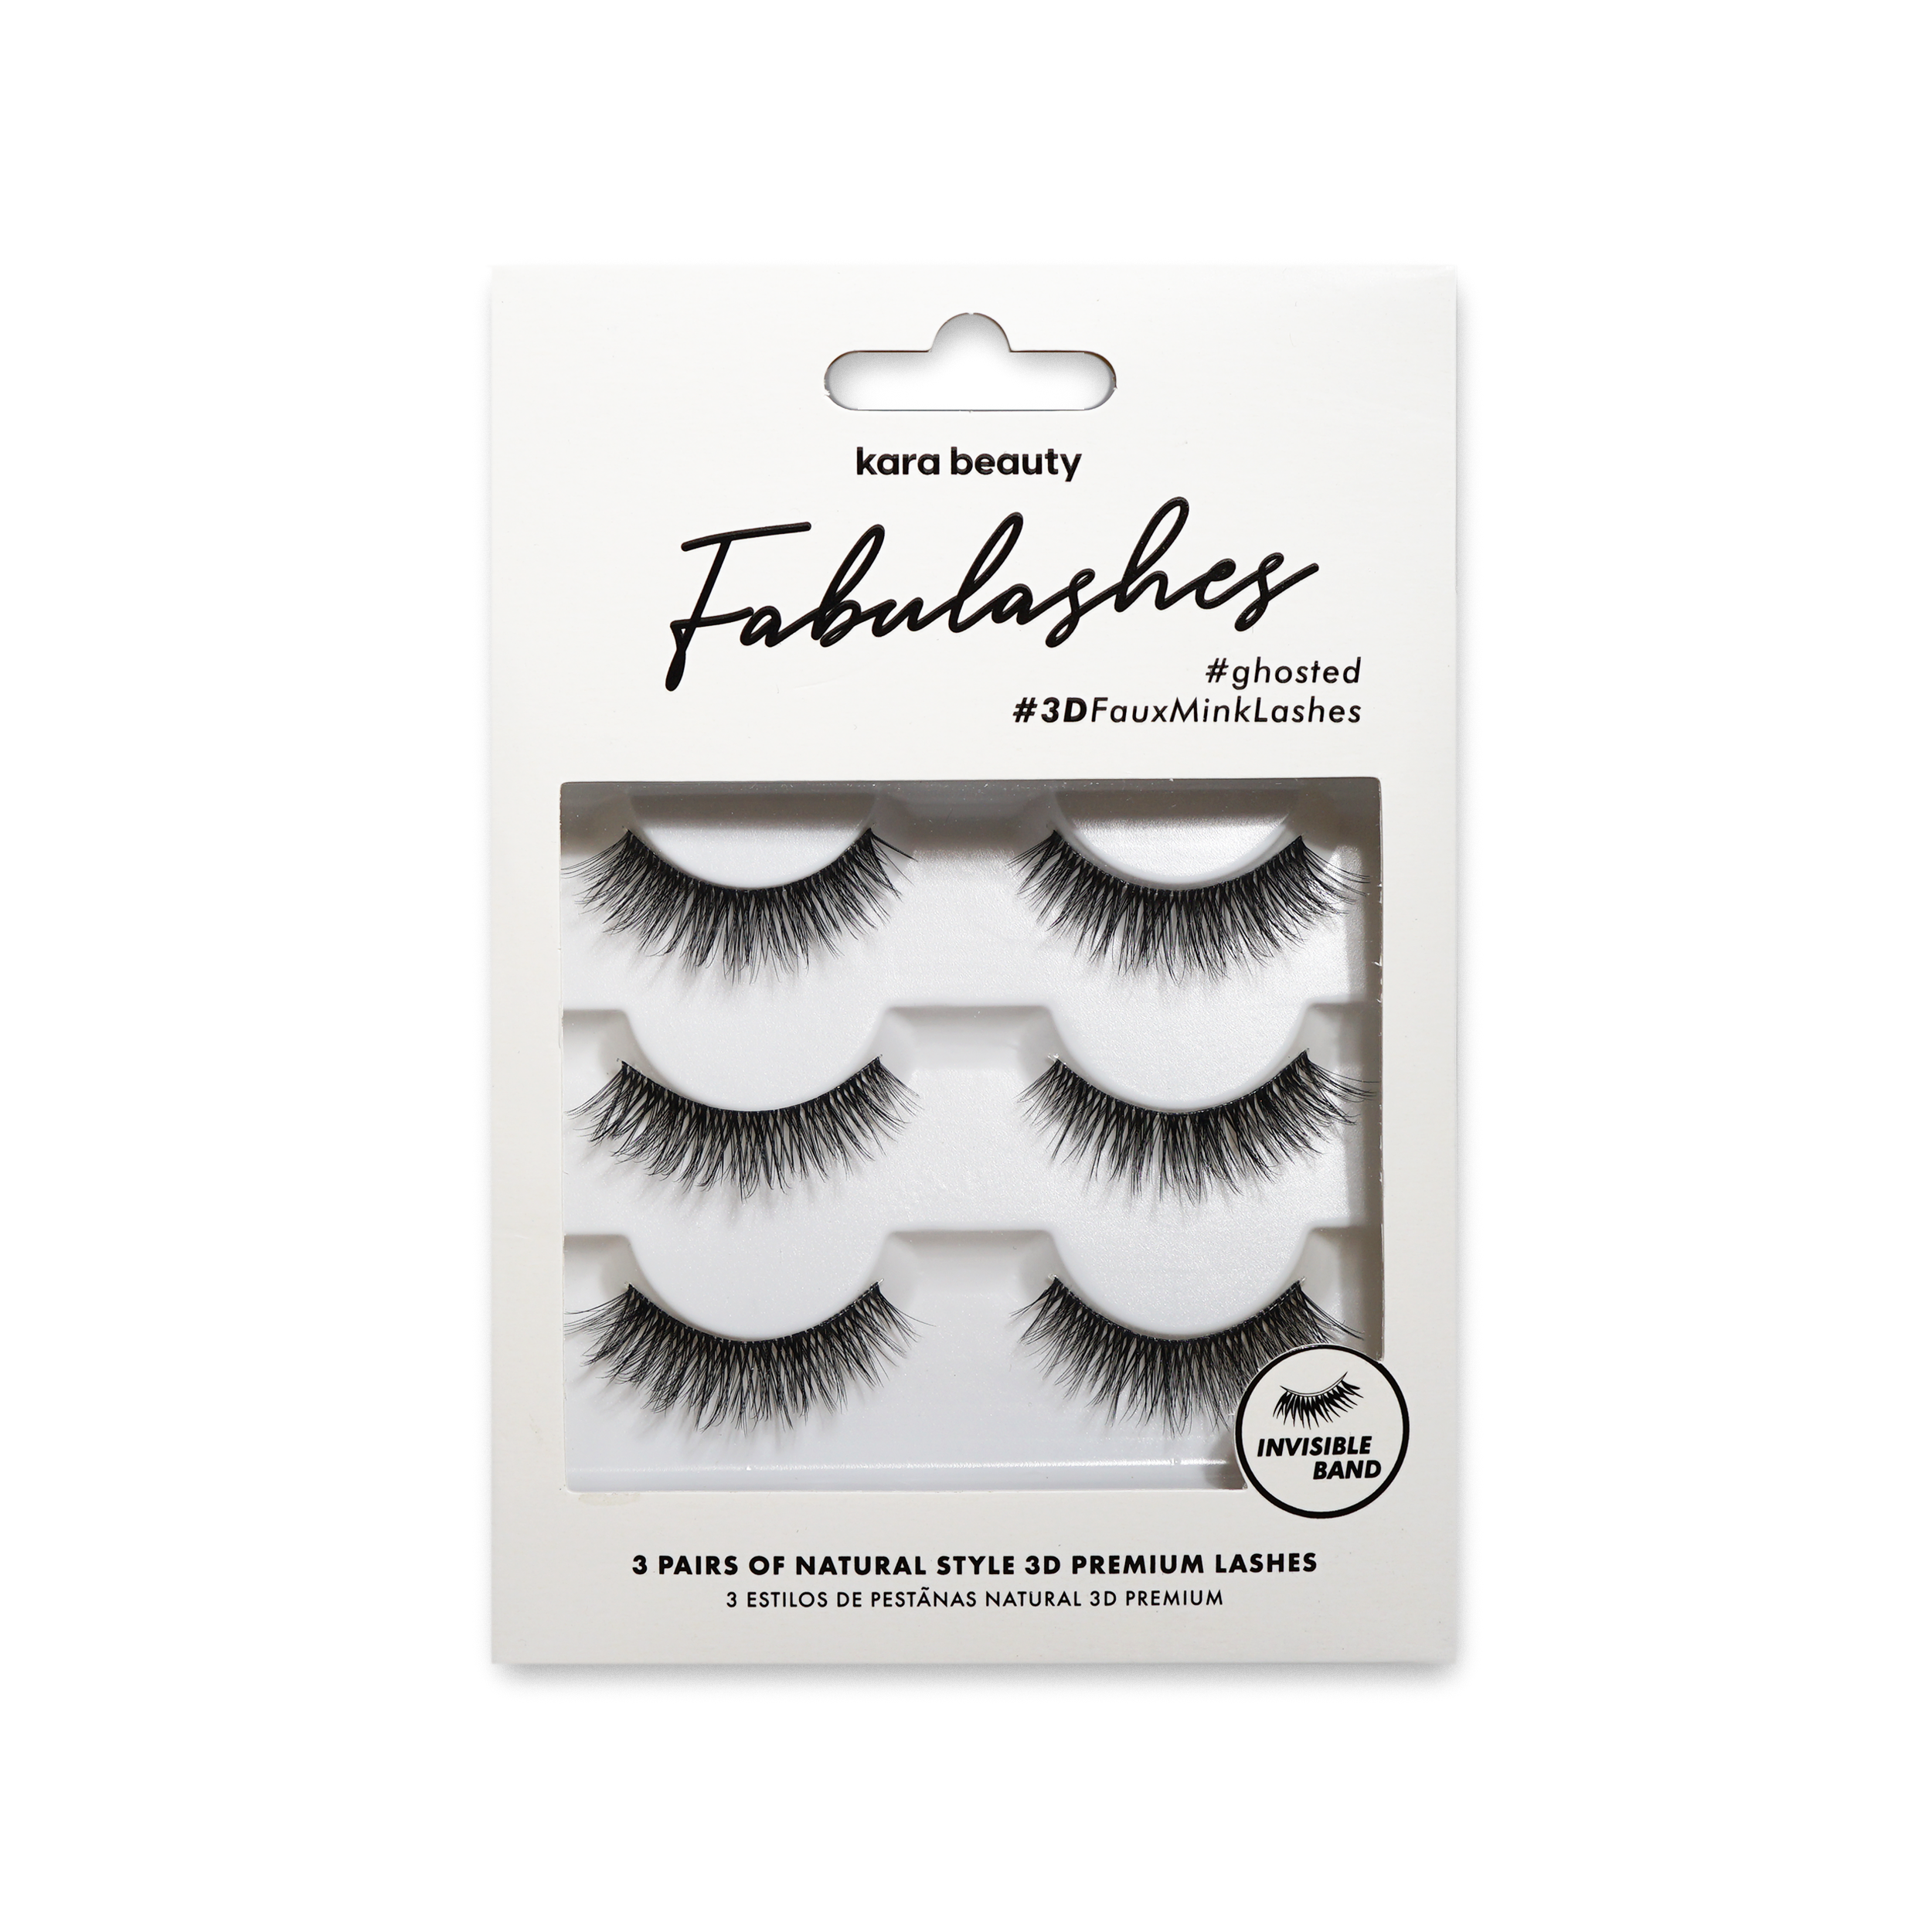 IBLK305 GHOSTED Invisible Band 3 Pack Fabulashes 3D Faux Mink Lashes